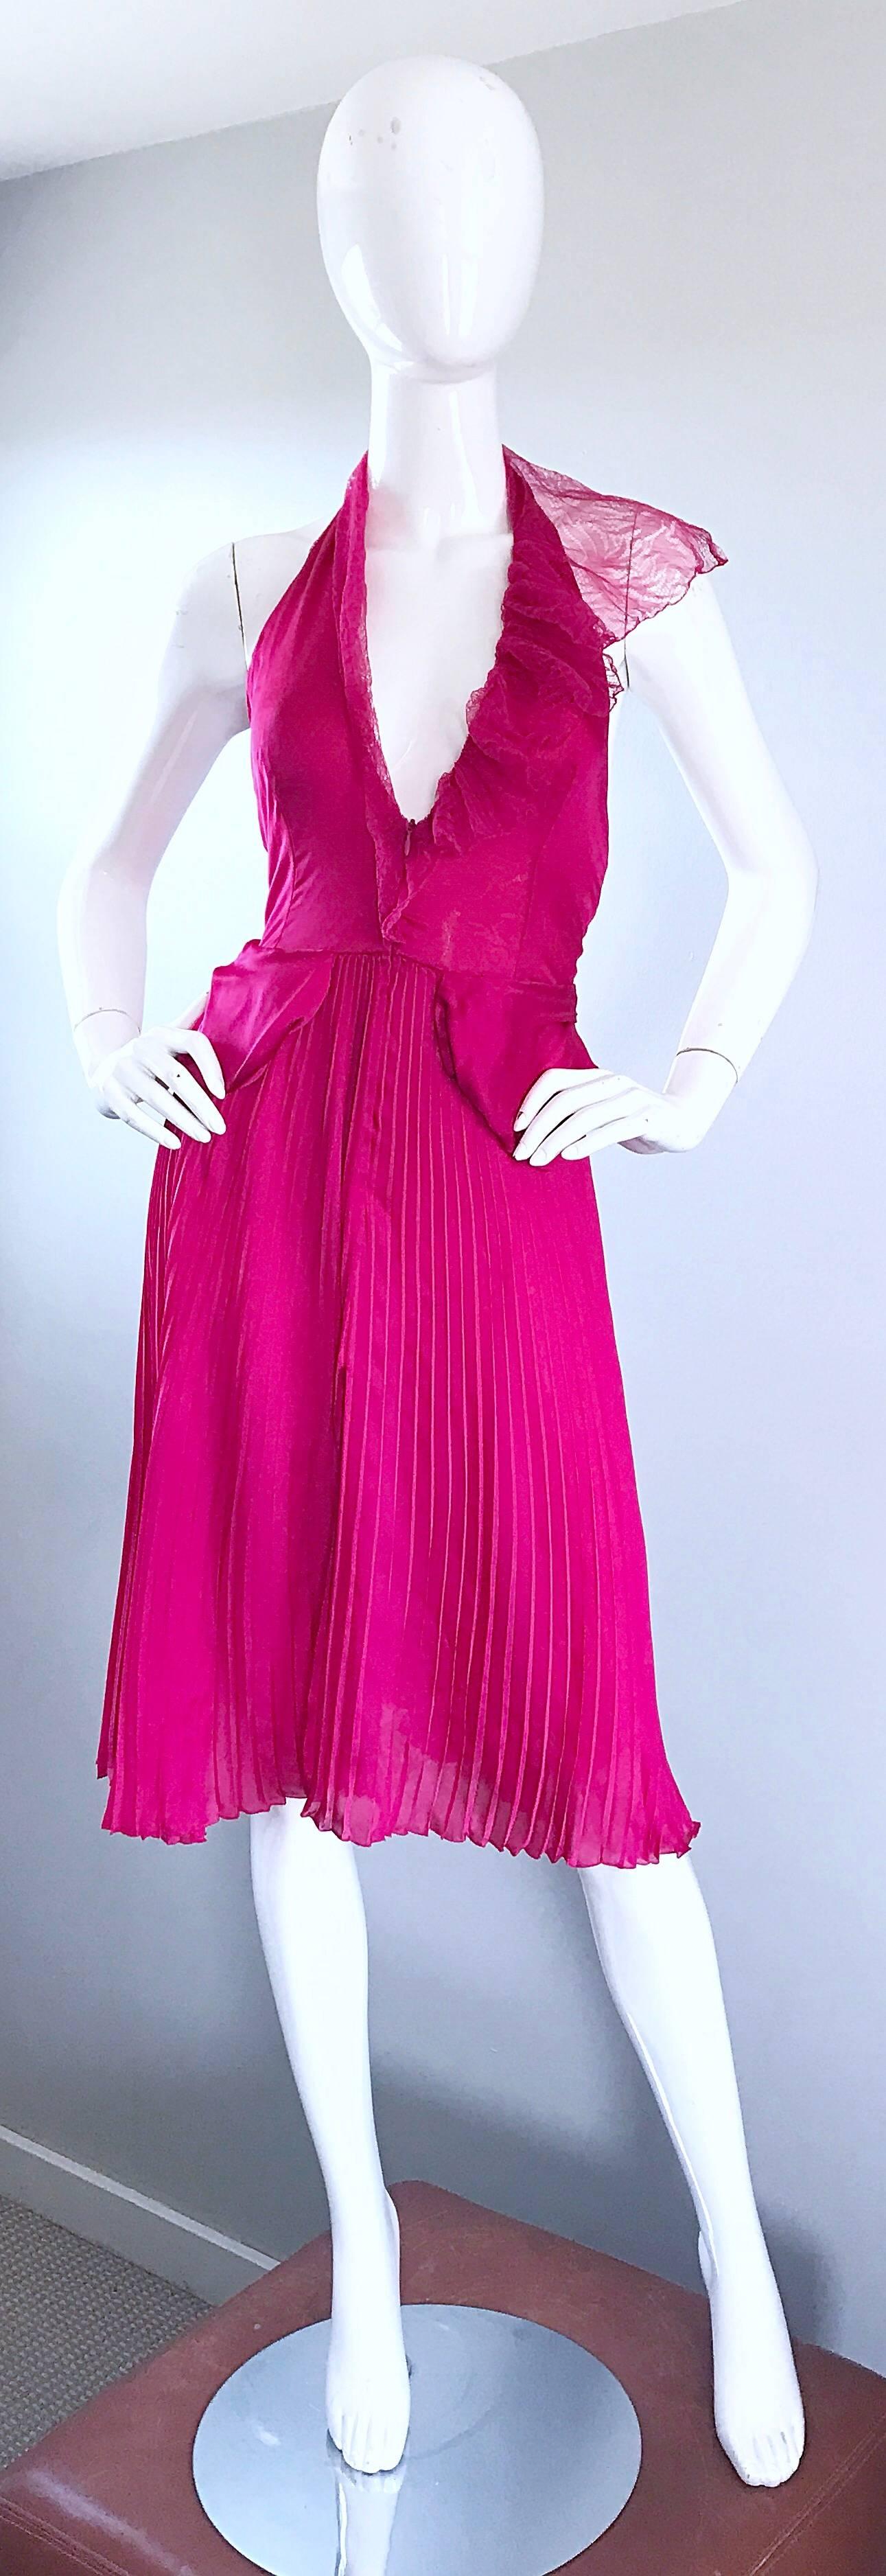 Sexy 1990s GIANNI VERSACE COUTURE (Pre-death) hot pink Avant Garde silk halter dress! Pays an ombage to Marilyn Monroe in her white TRAVILLA dress! So much work went into the construction of this beauty! Features a built in bodysuit to ensure proper